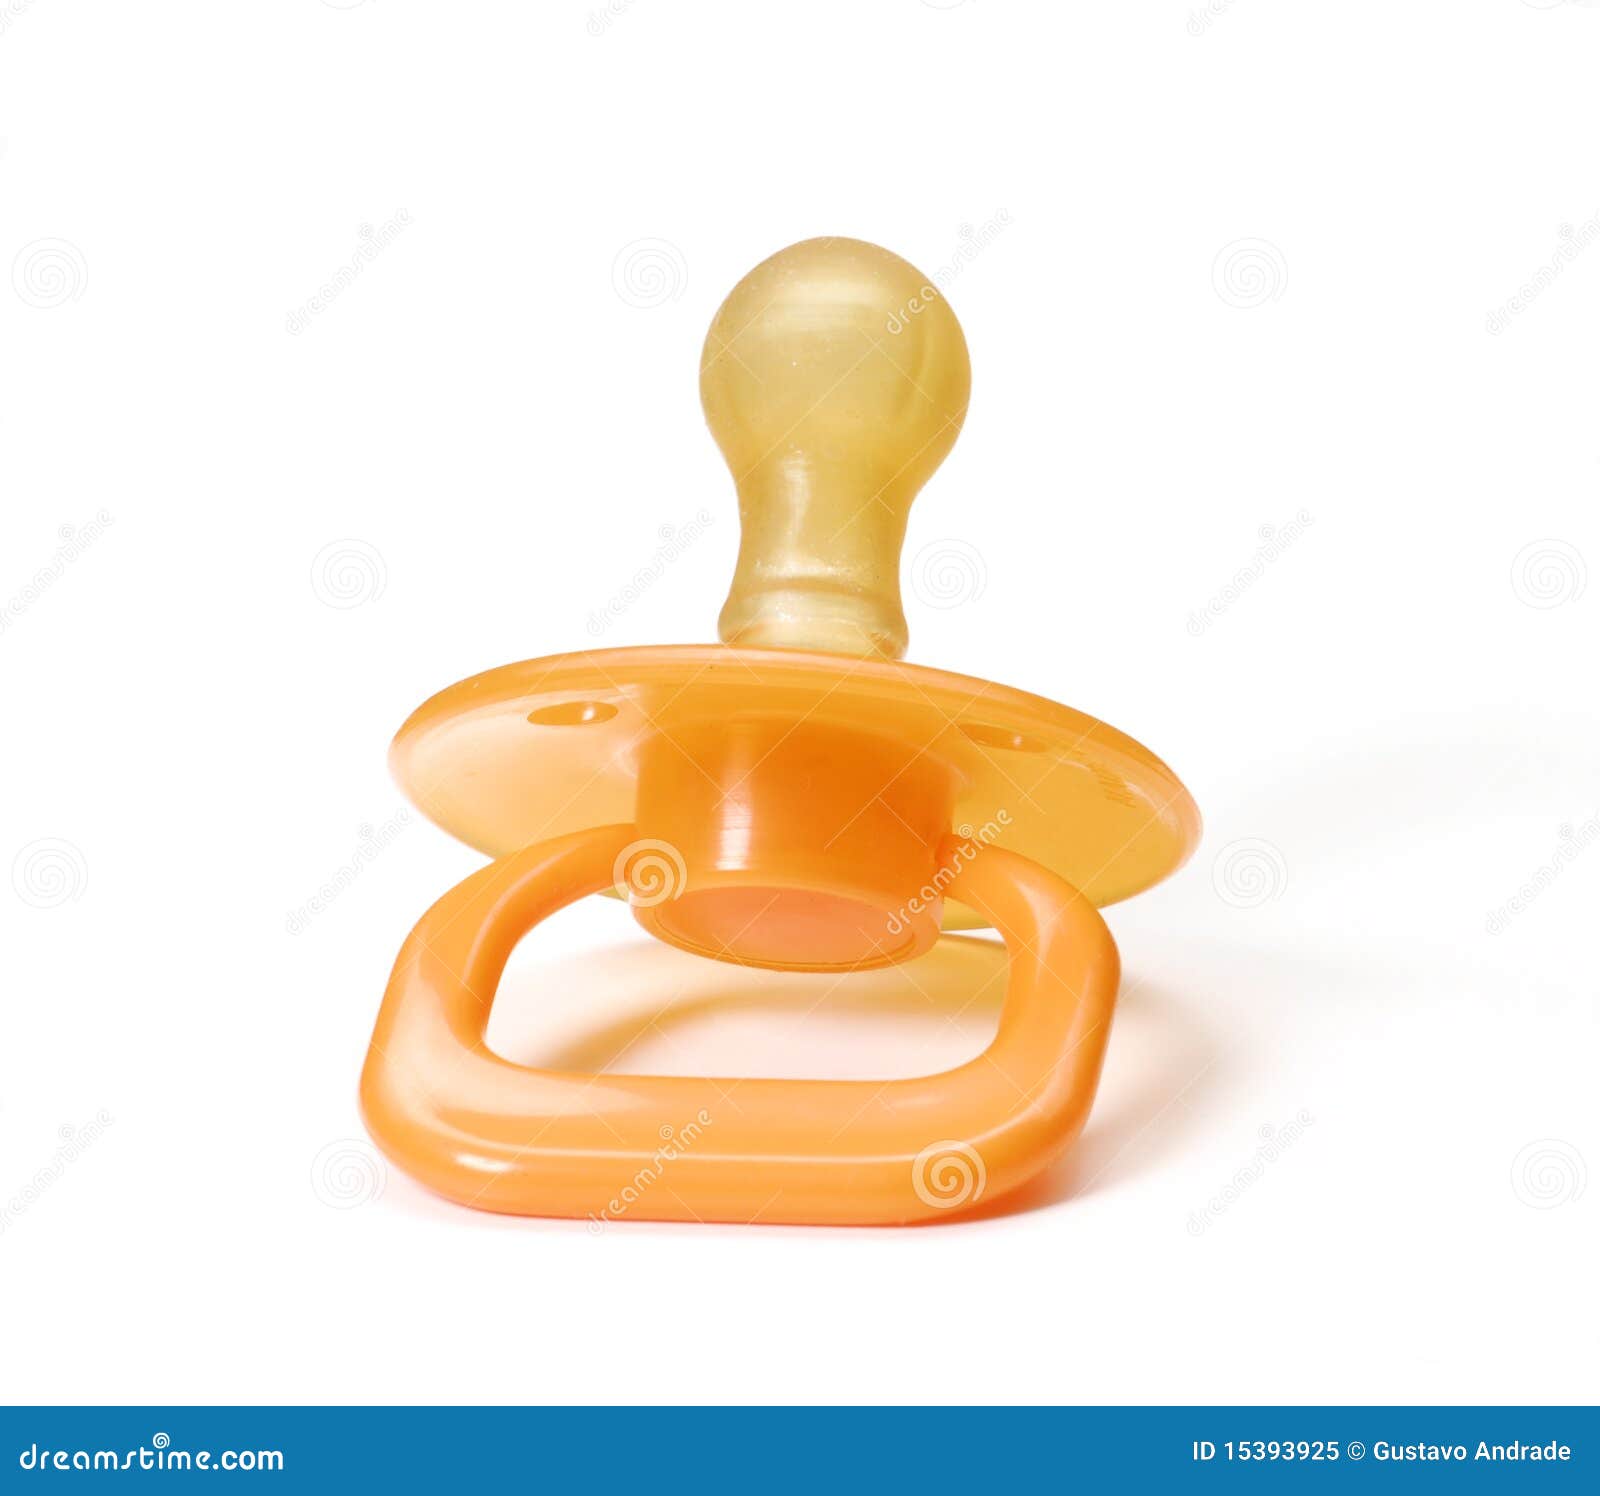 The pacifier. Yellow pacifier isolated on white background.